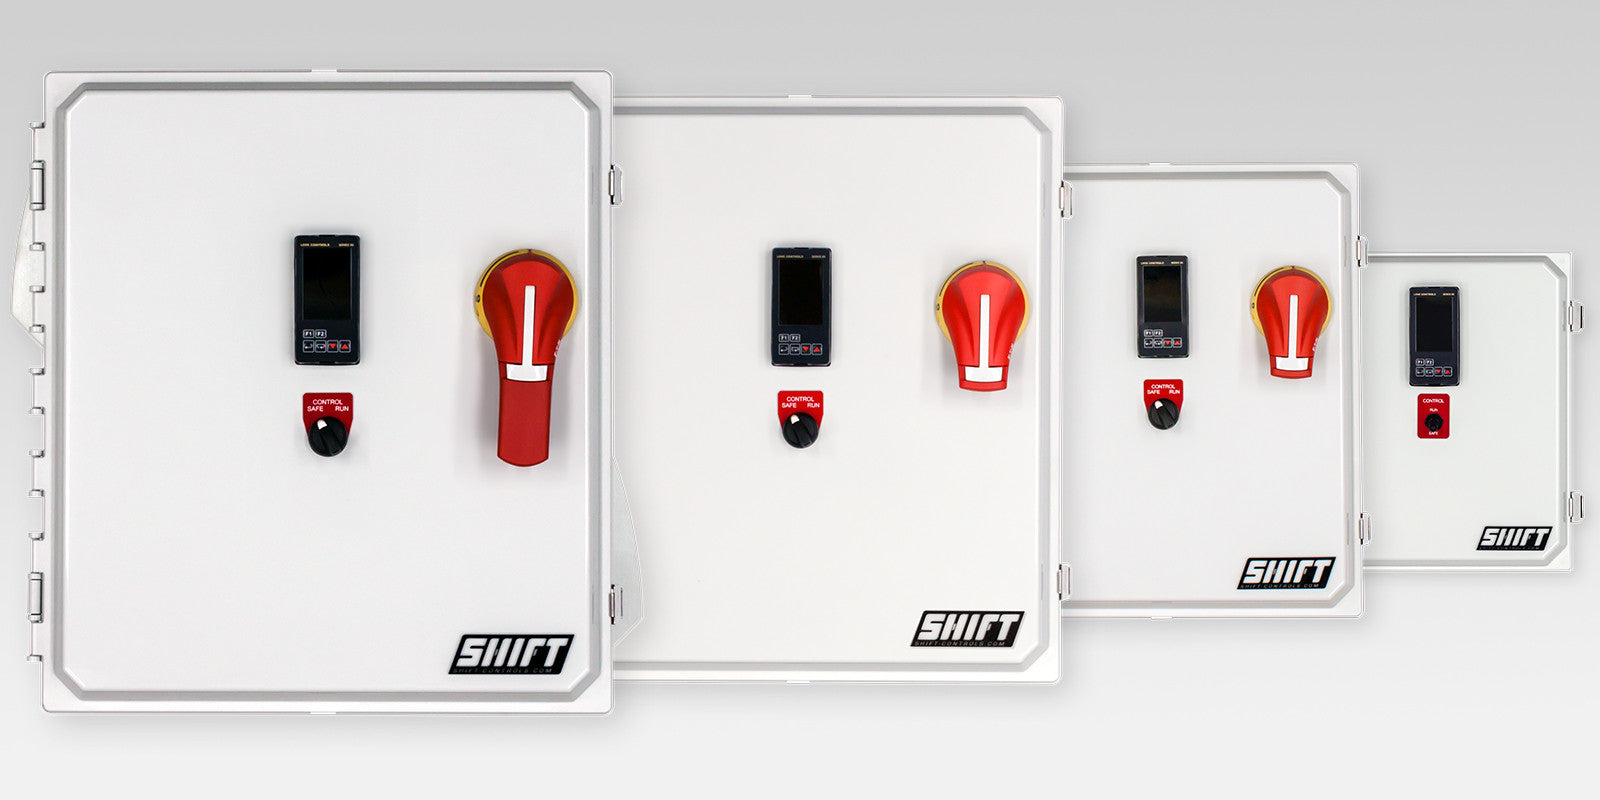 Simply the Easiest Way to Purchase Temperature Control Panels